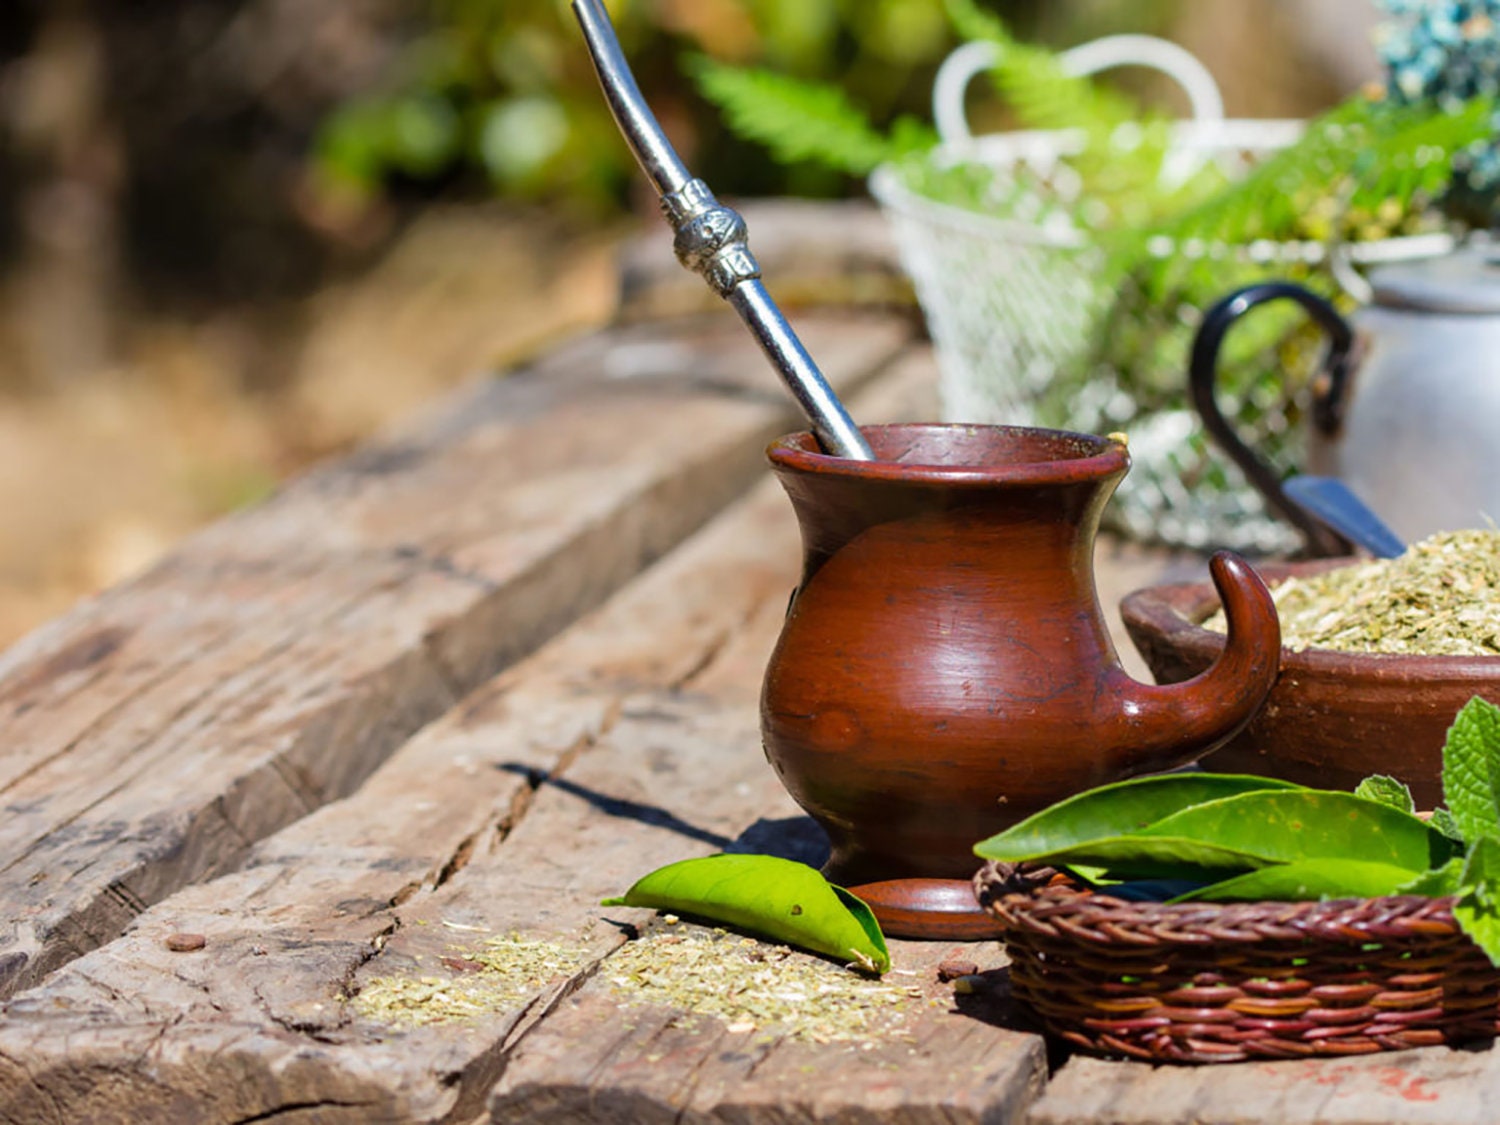 Traditional yerba mate in a brown gourd with a metal bombilla, on a rustic wooden table with loose mate leaves and greenery.